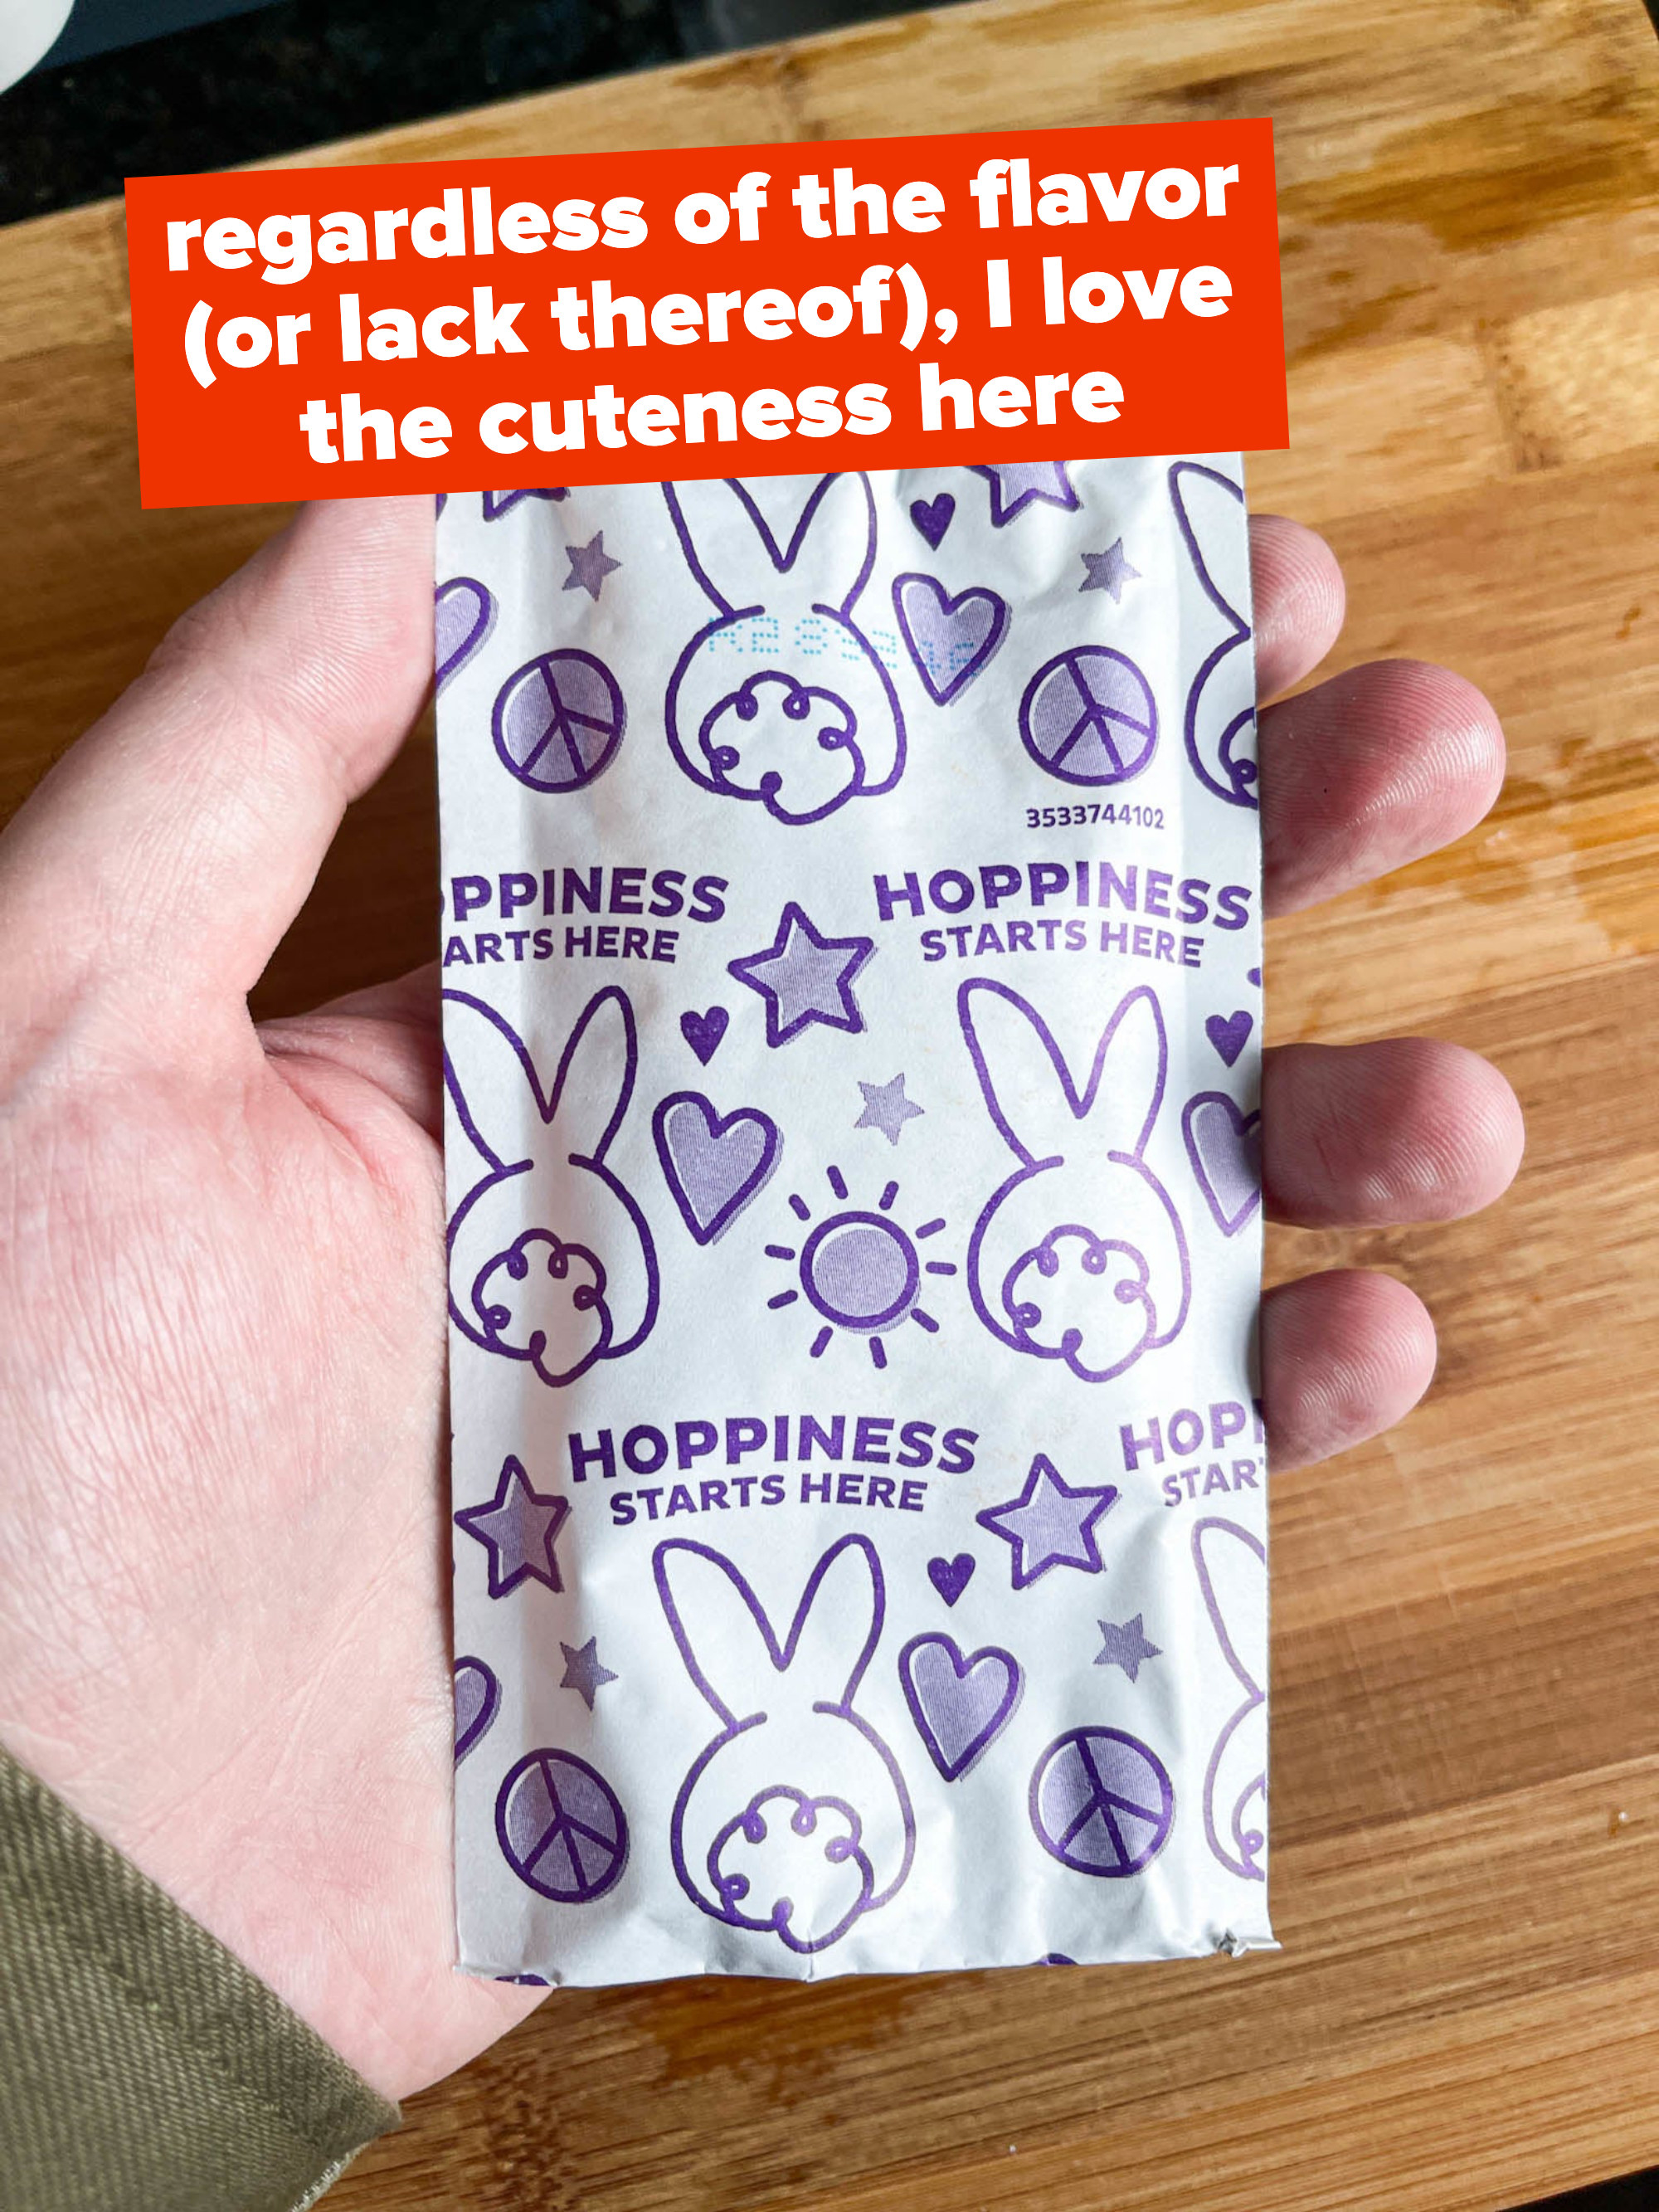 Cute-looking cheese packet in the author&#x27;s hand with bunnies on it and &quot;hoppiness starts here&quot;, with text &quot;regardless of the flavor, I loved the cuteness here&quot;